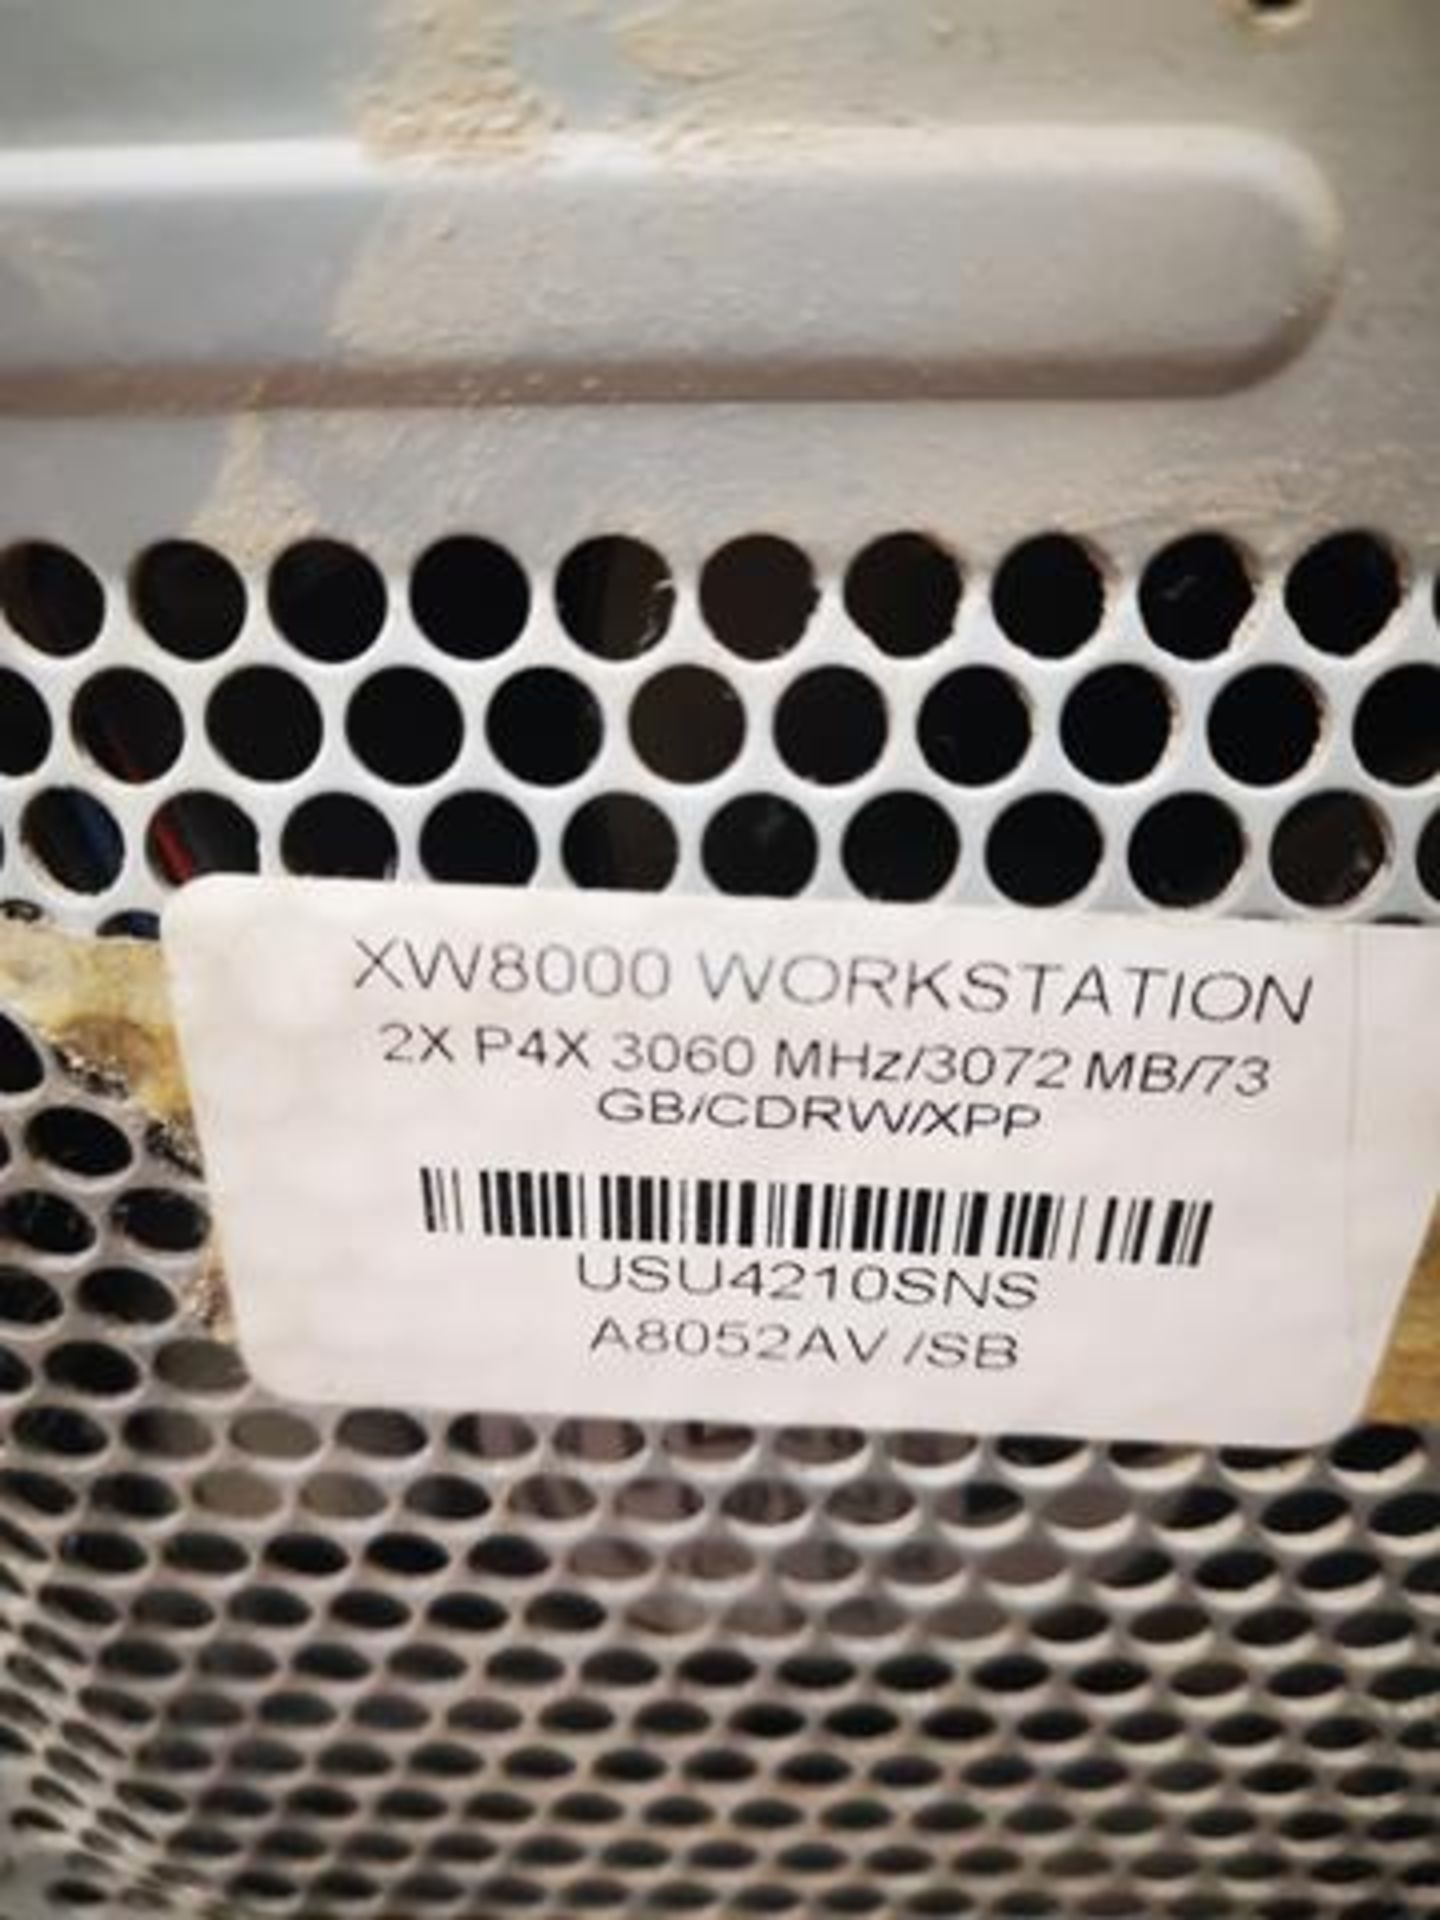 HP, WORKSTATION XW8000, WORKSTATION TOWER - Image 3 of 3